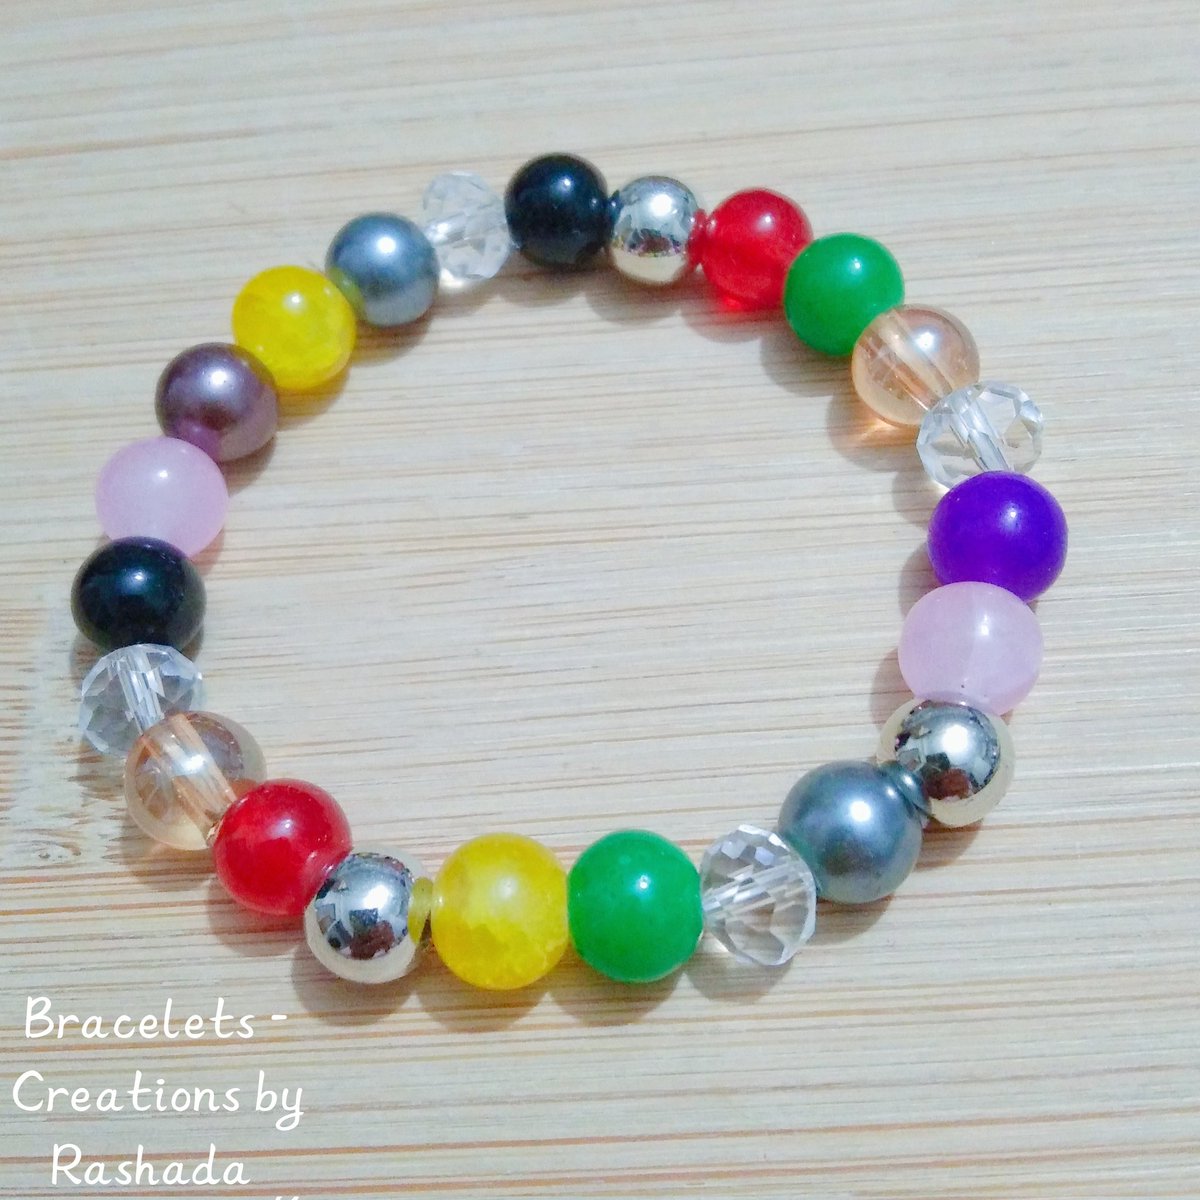 #NEWCOLLECTION!!🥳🎉🥰 Happy Sunday!🪻🌷 #new #bracelet for #Victoryday (#বিজয়দিবস) ,🇧🇩& #Christmas🎄 #occasion. Just look at that, it  presents with awesome color combinations. So beautiful!💜🤍🩷

 #ordernow  #gift #jewelryforsale  #accessories  #DhakaBangladesh #DhakaCity